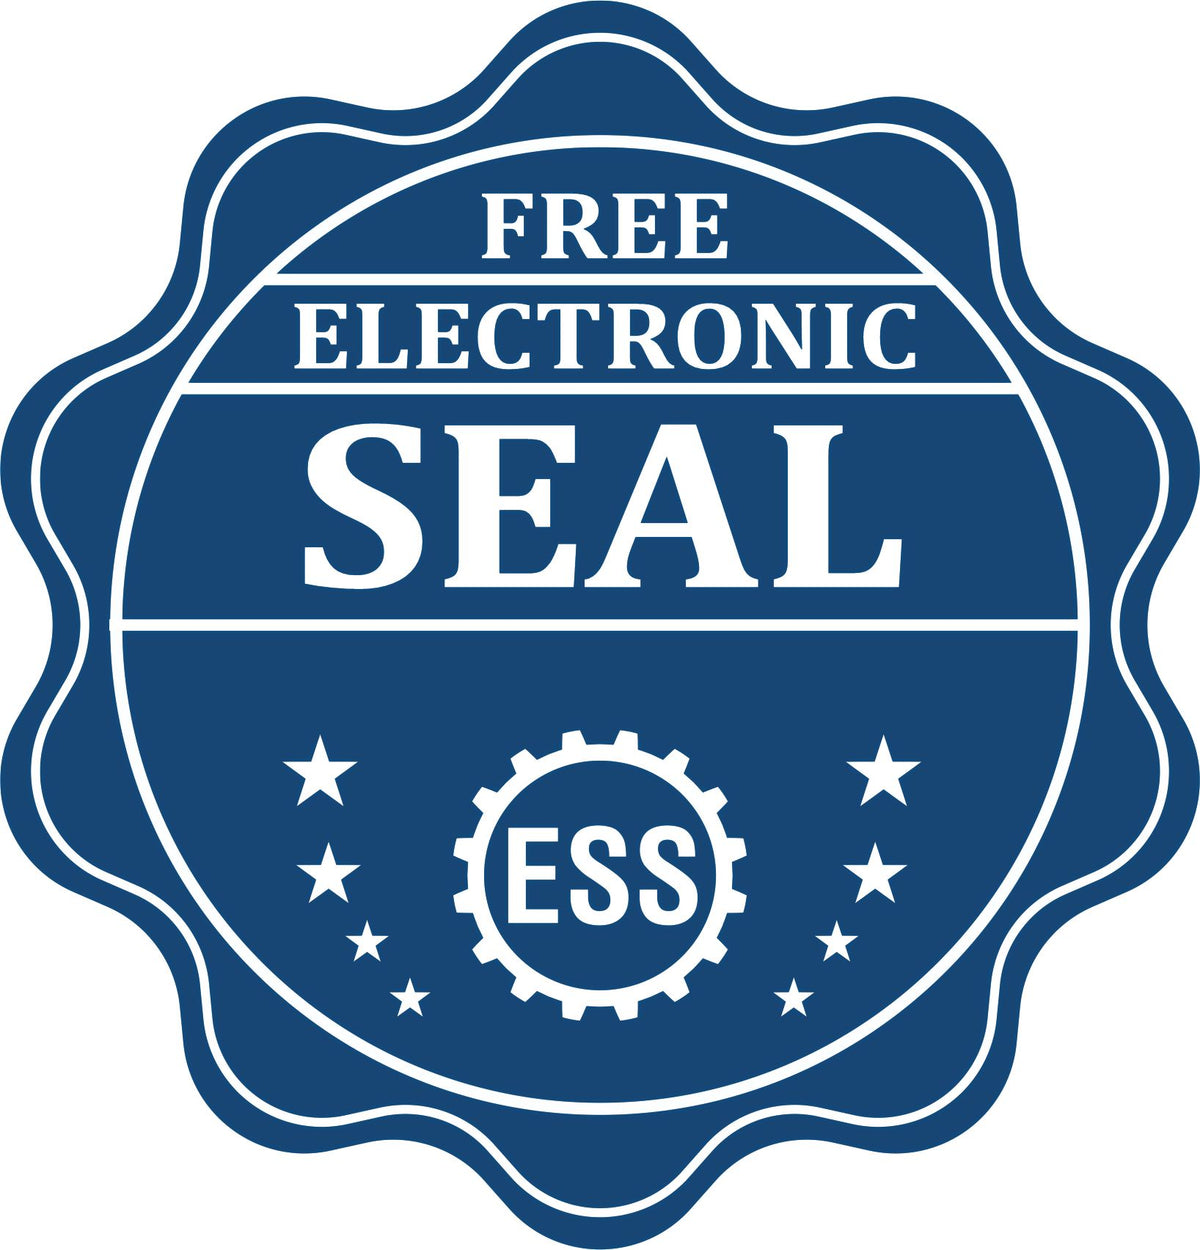 A badge showing a free electronic seal for the Arkansas Professional Engineer Seal Stamp with stars and the ESS gear on the emblem.